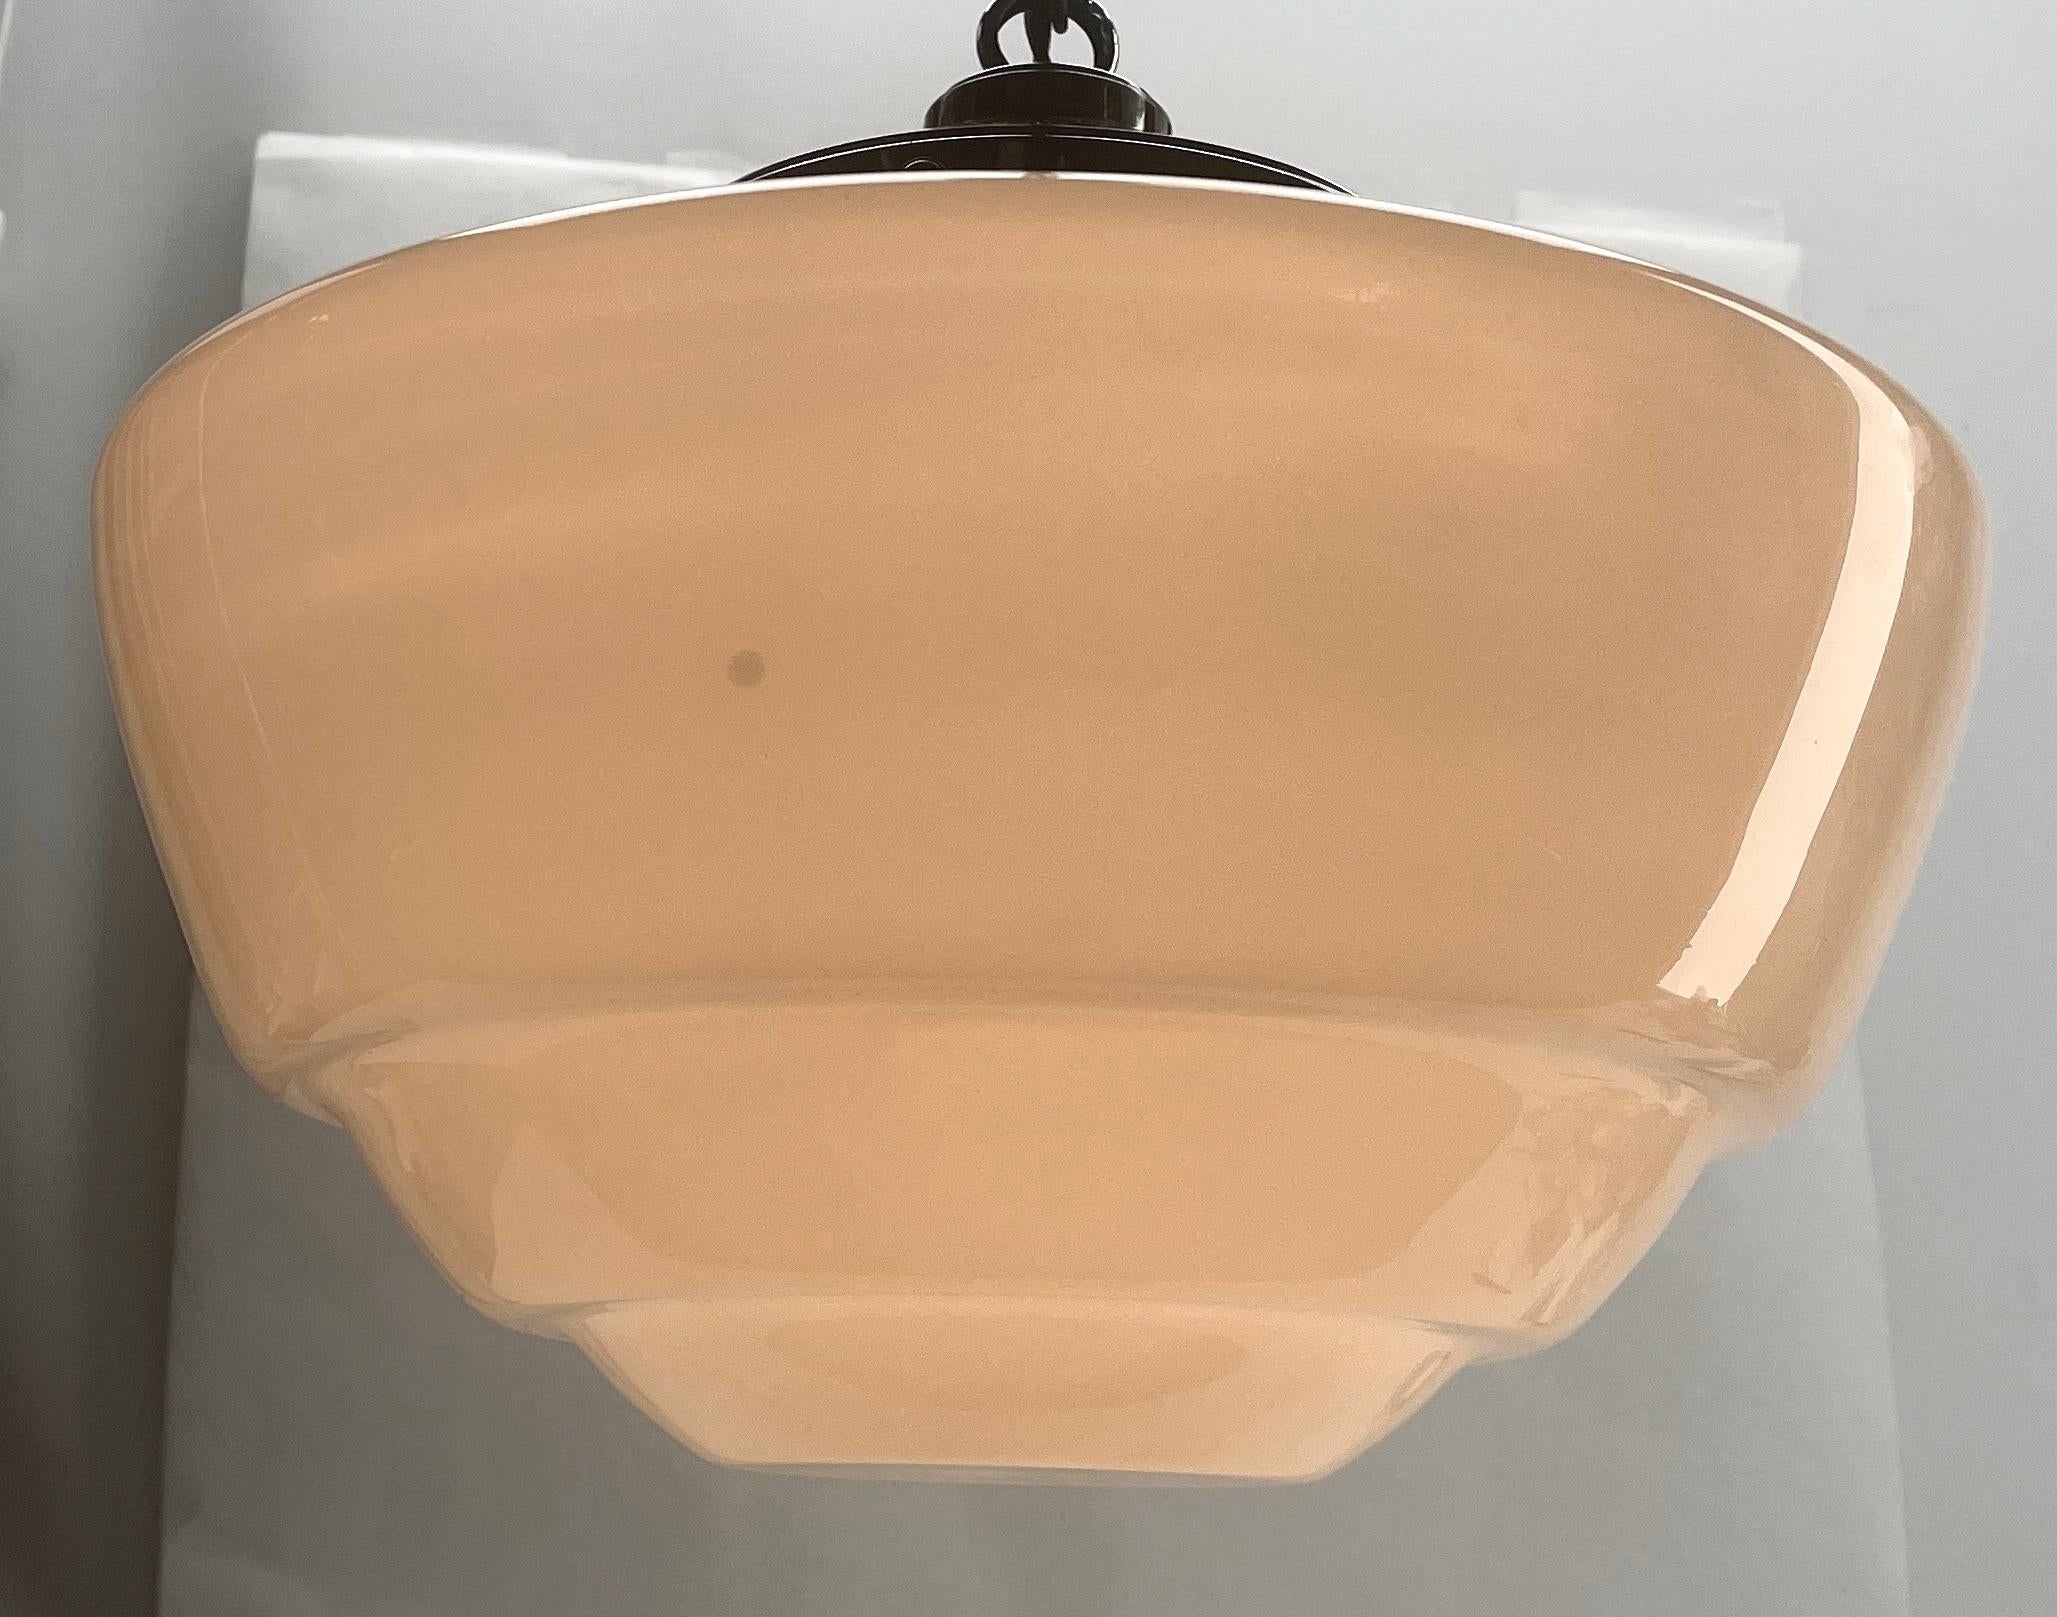 From the range by Phillips netherlands, this centre-light is on a chain. 30 cm
The lamp has a fitting on a Solid chrome plate and holds a shade of opaline glass.

We are happy to adjust the height to your wishes at no extra cost.  

In good